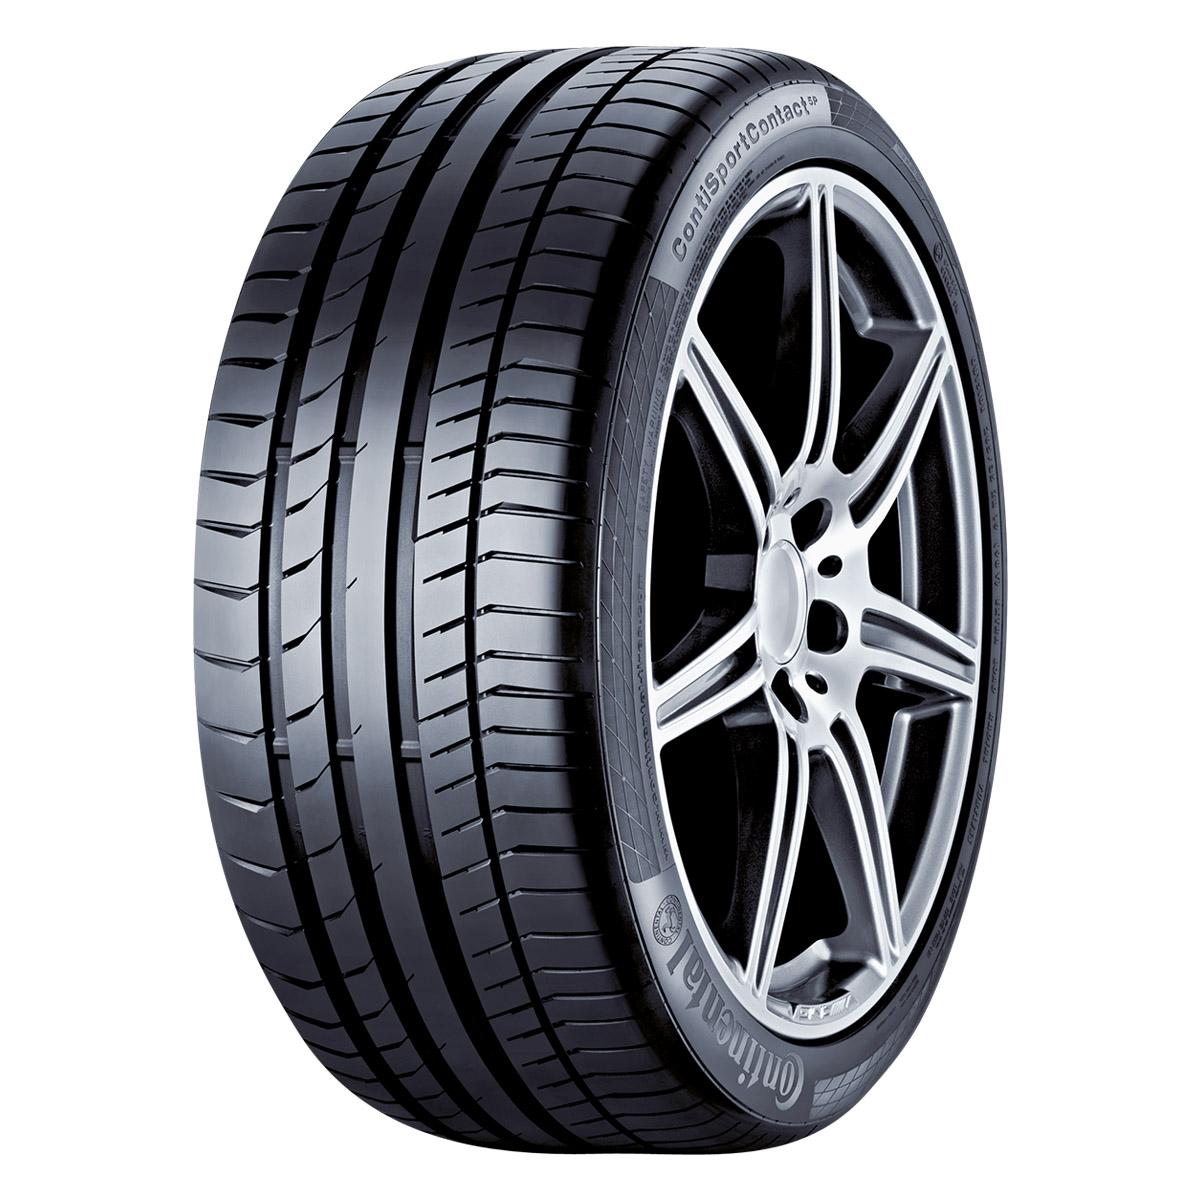 Anvelope vara CONTINENTAL SPORT CONTACT 5P T0 265/35 R21 101Y